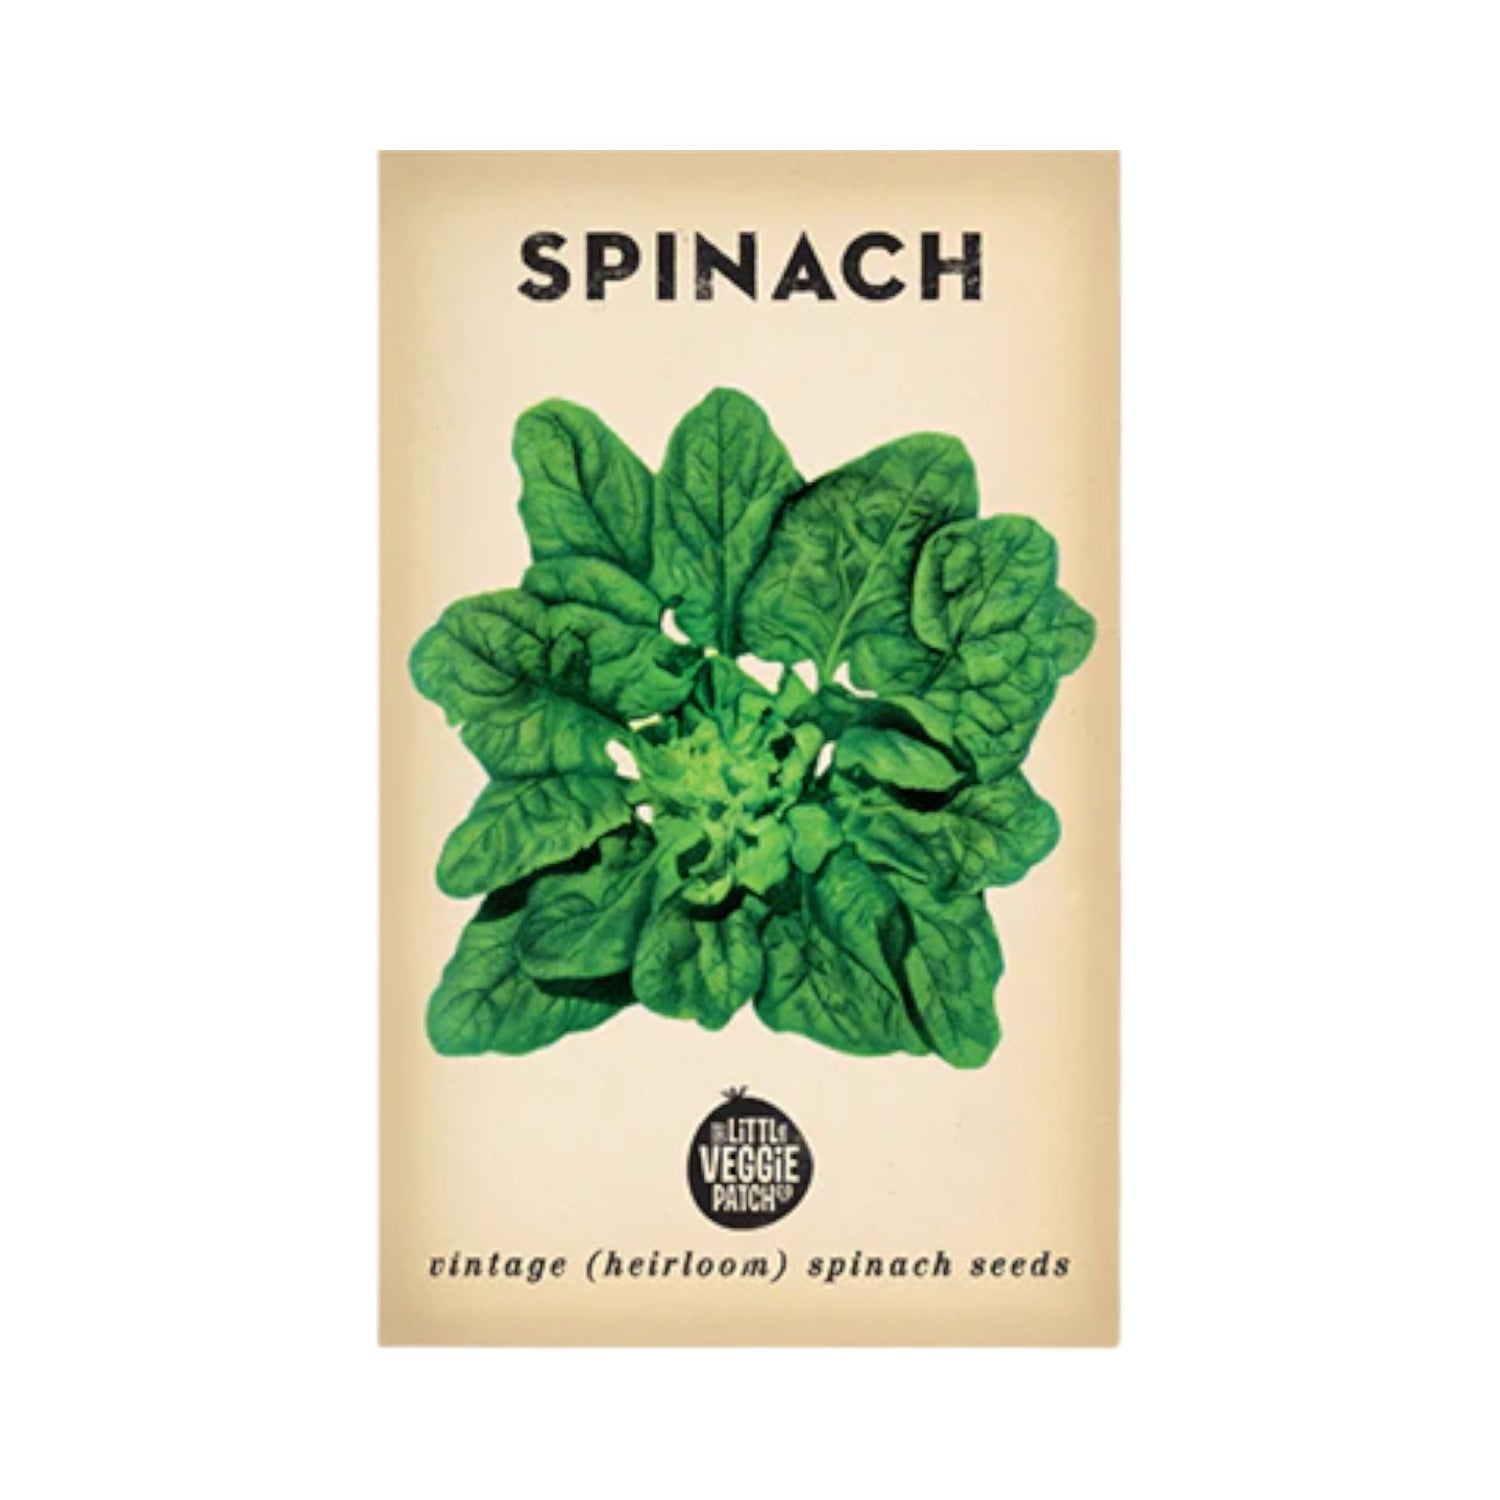 Spinach Bloomsdale